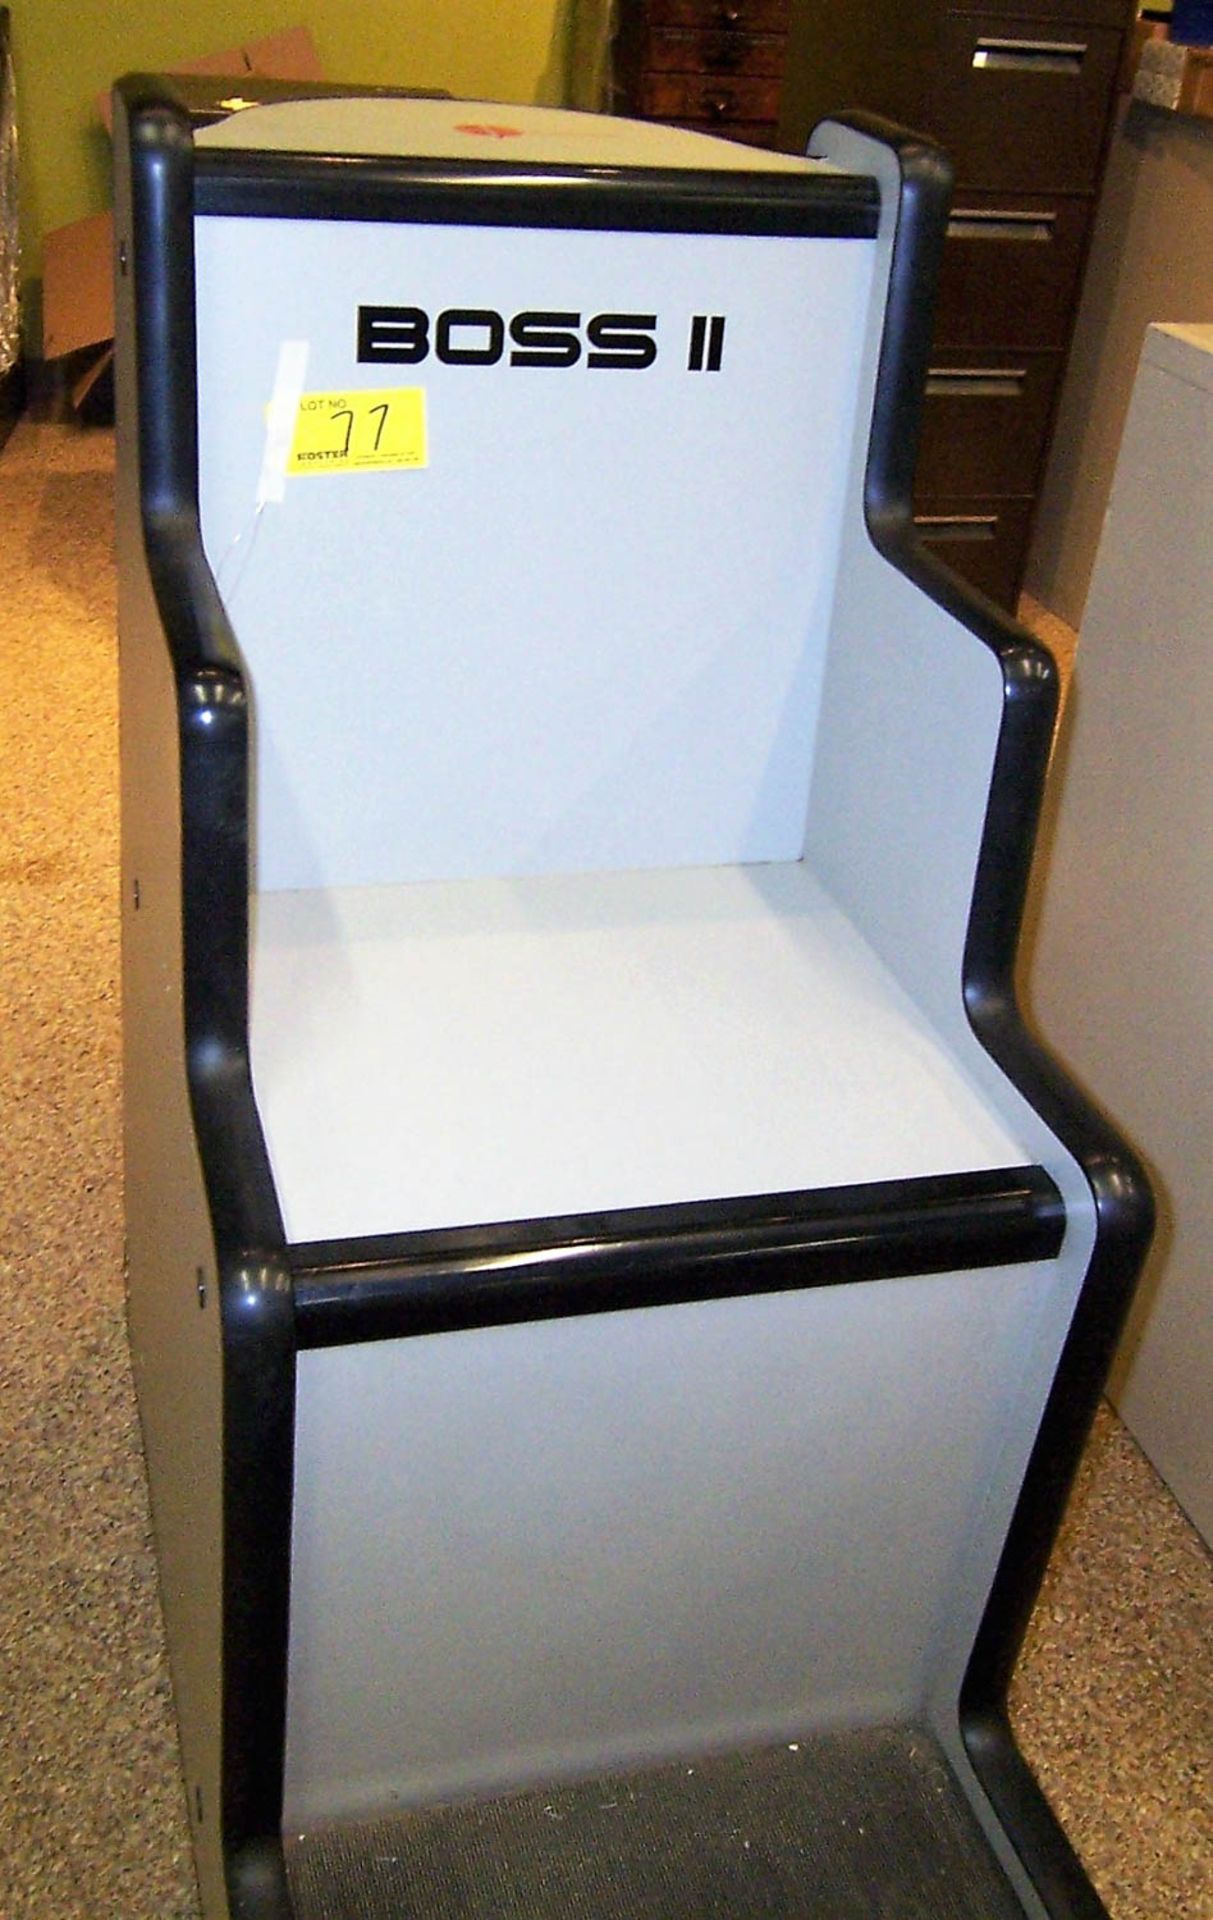 BOSS II SECURITY STAND